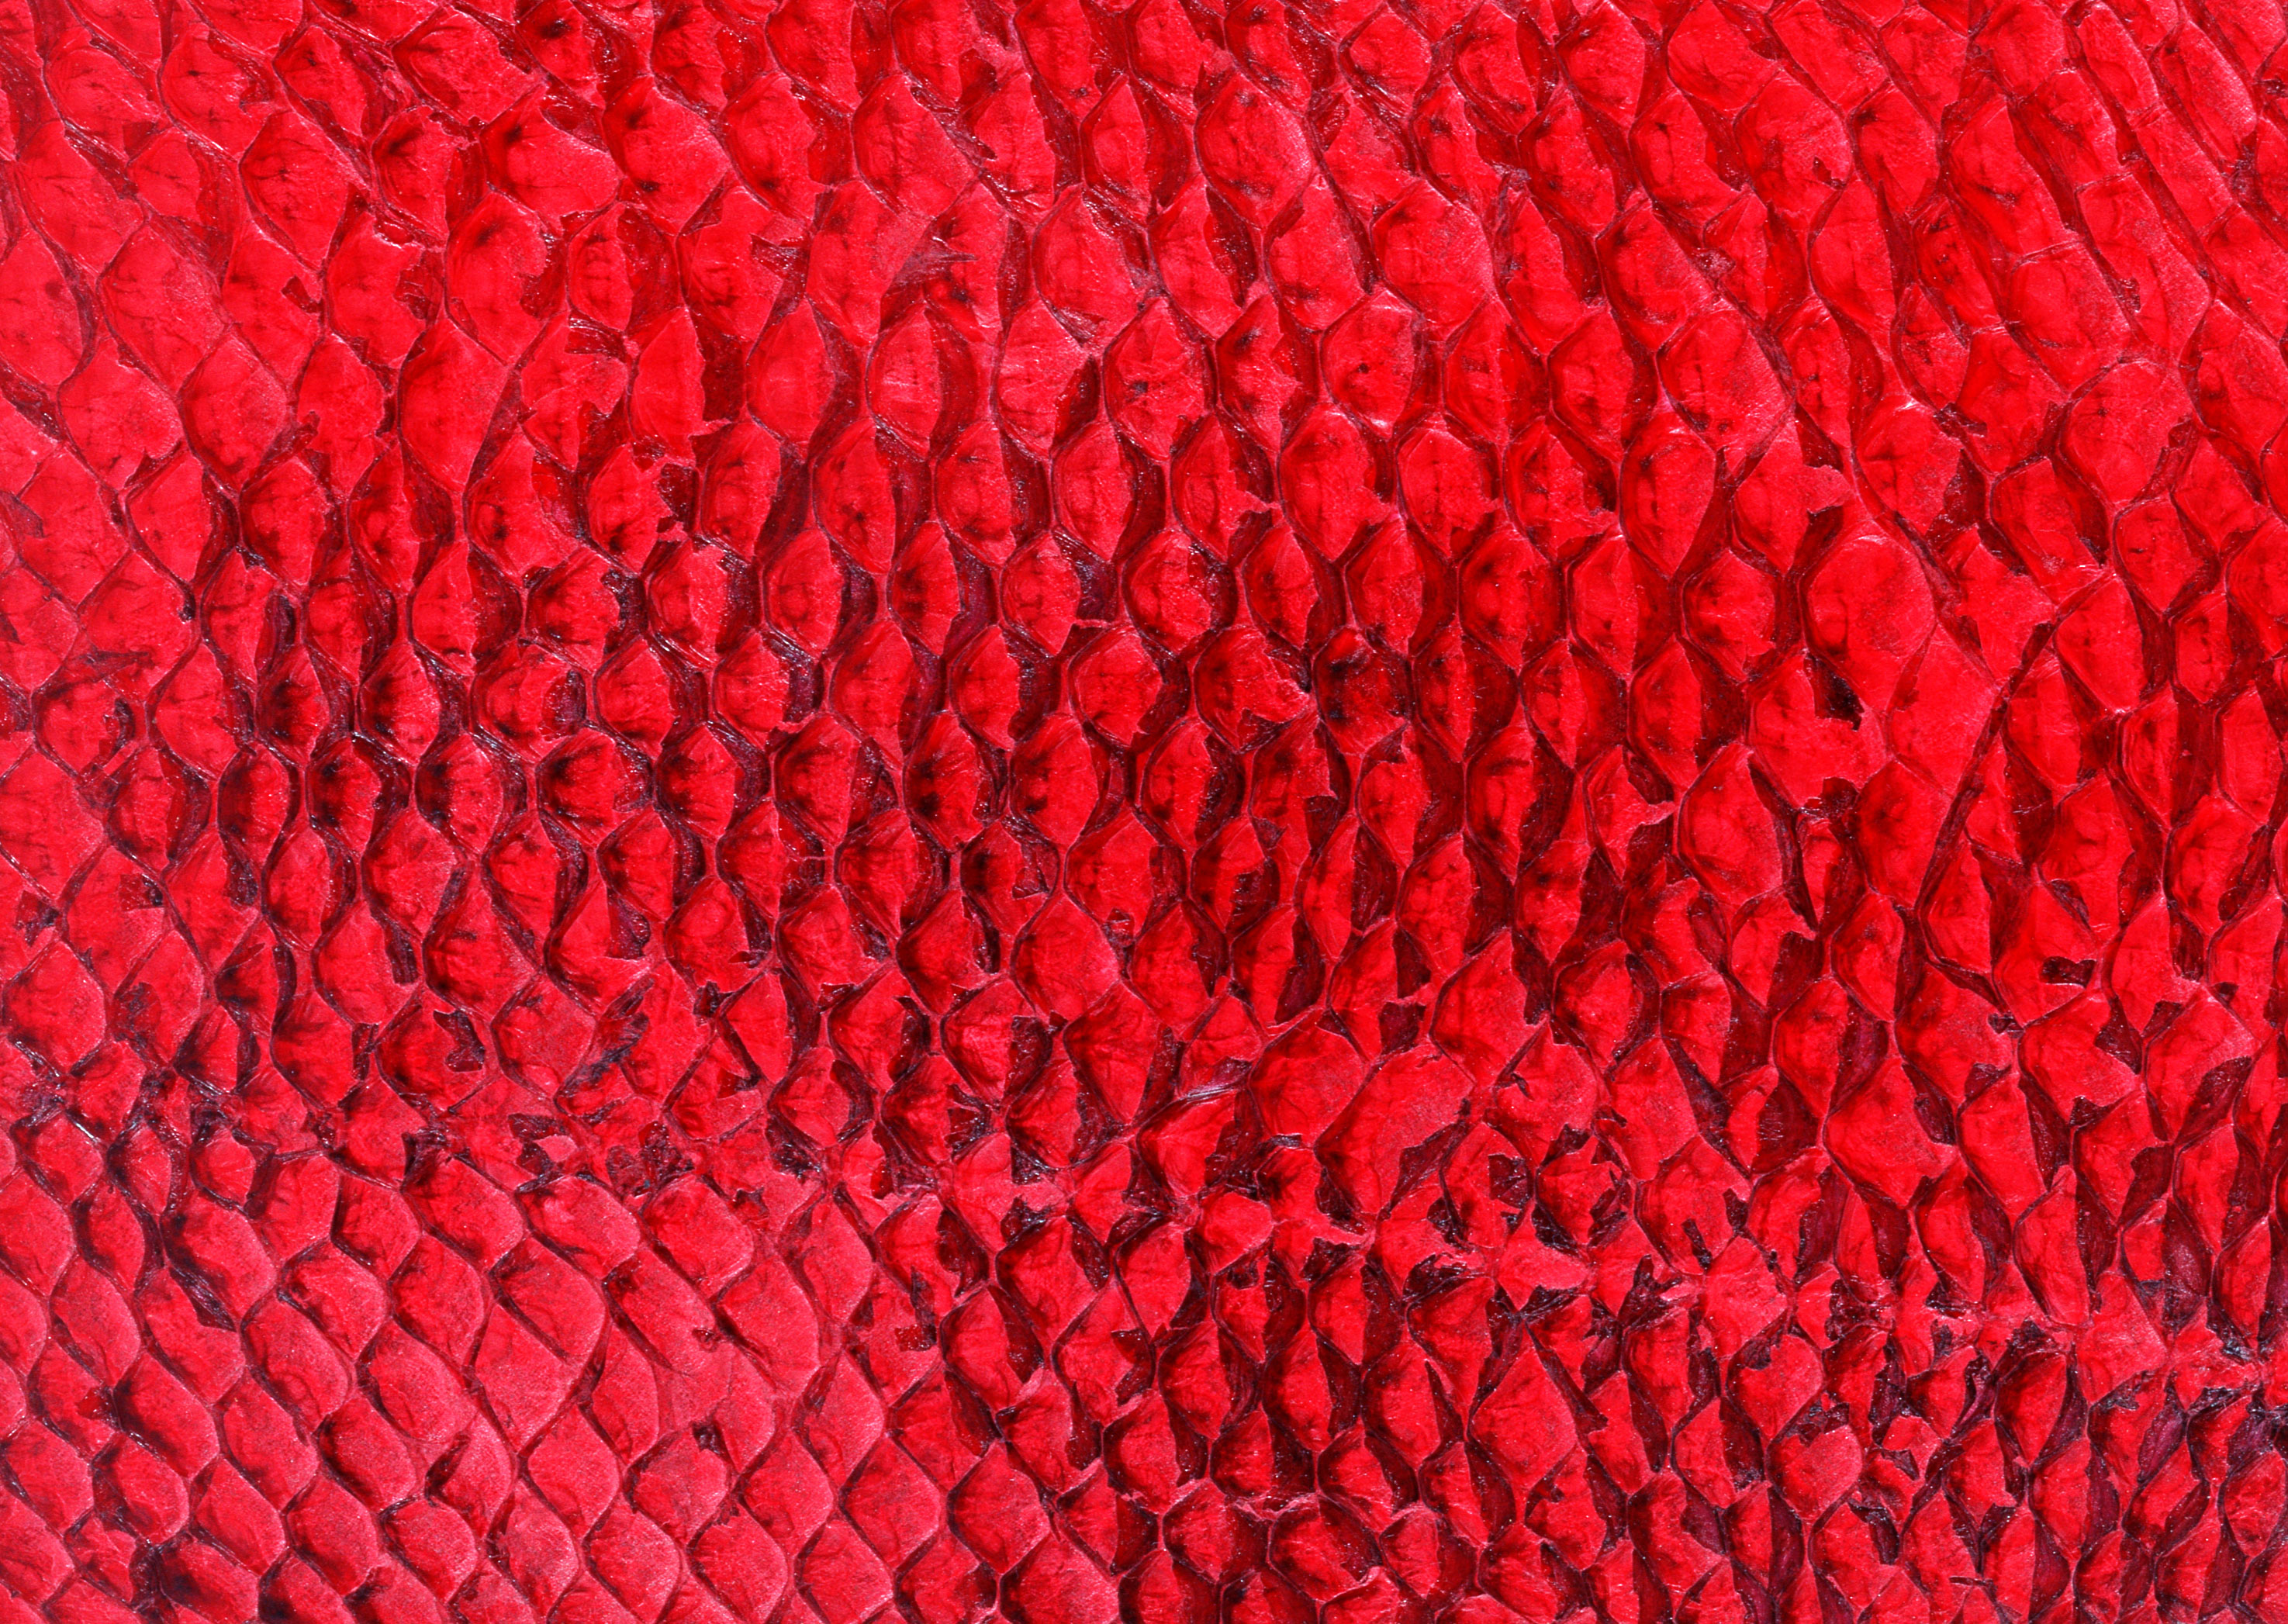 Red snake leather texture background image download, snakes